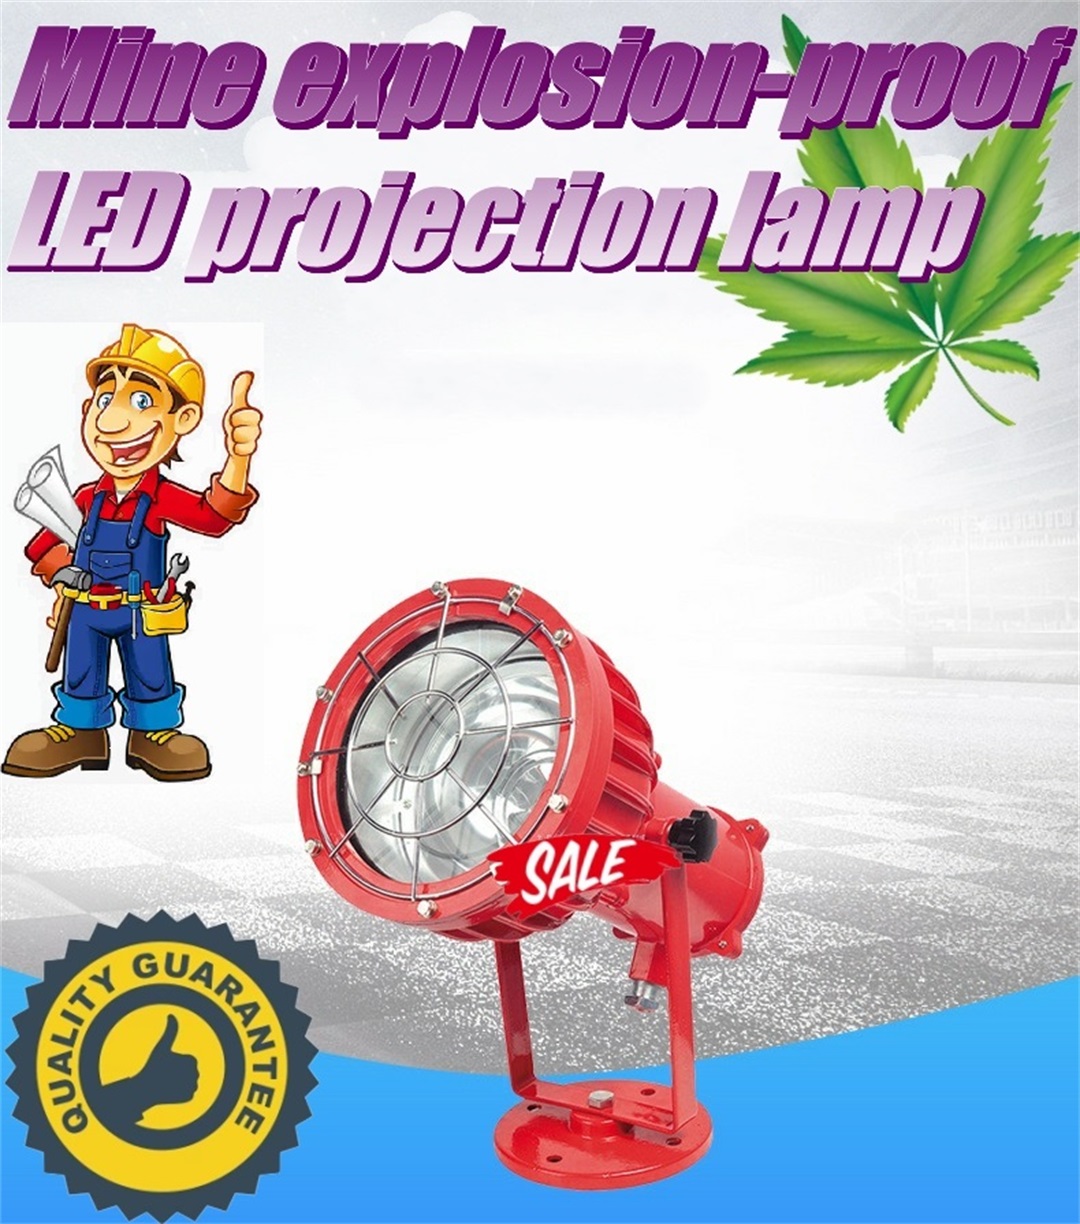 Mine explosion-proof LED projection lamp